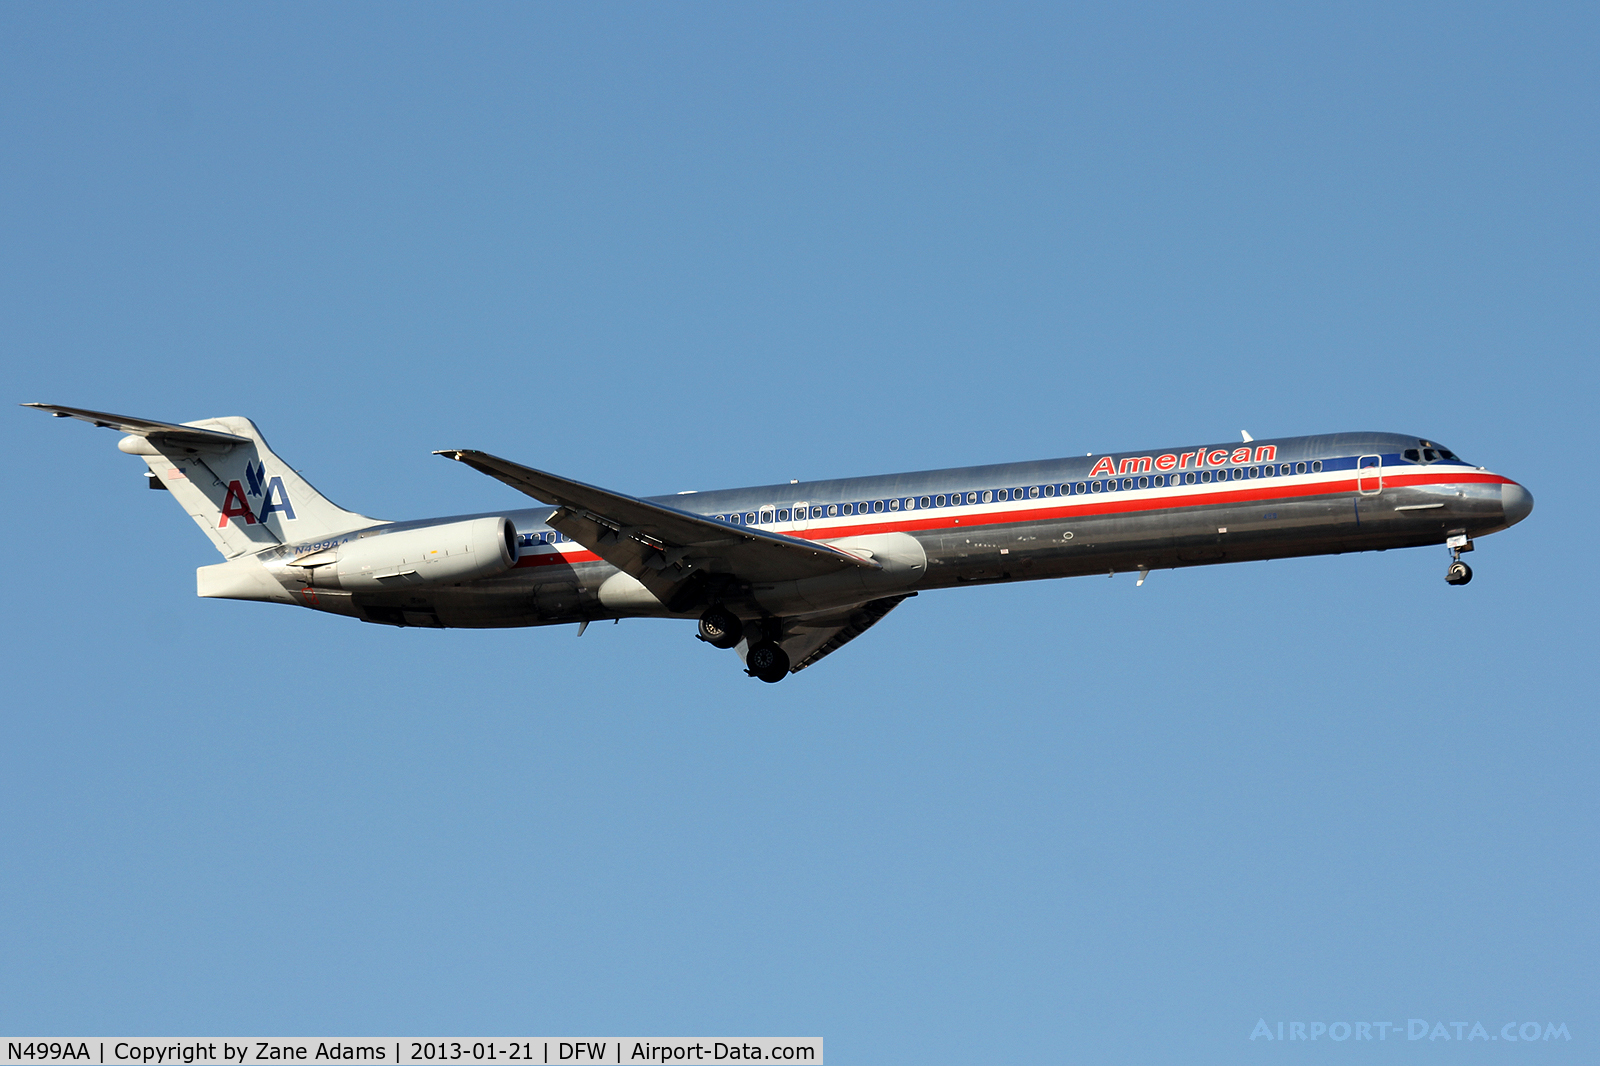 N499AA, 1989 McDonnell Douglas MD-82 (DC-9-82) C/N 49737, American Airlines landing at DFW Airport